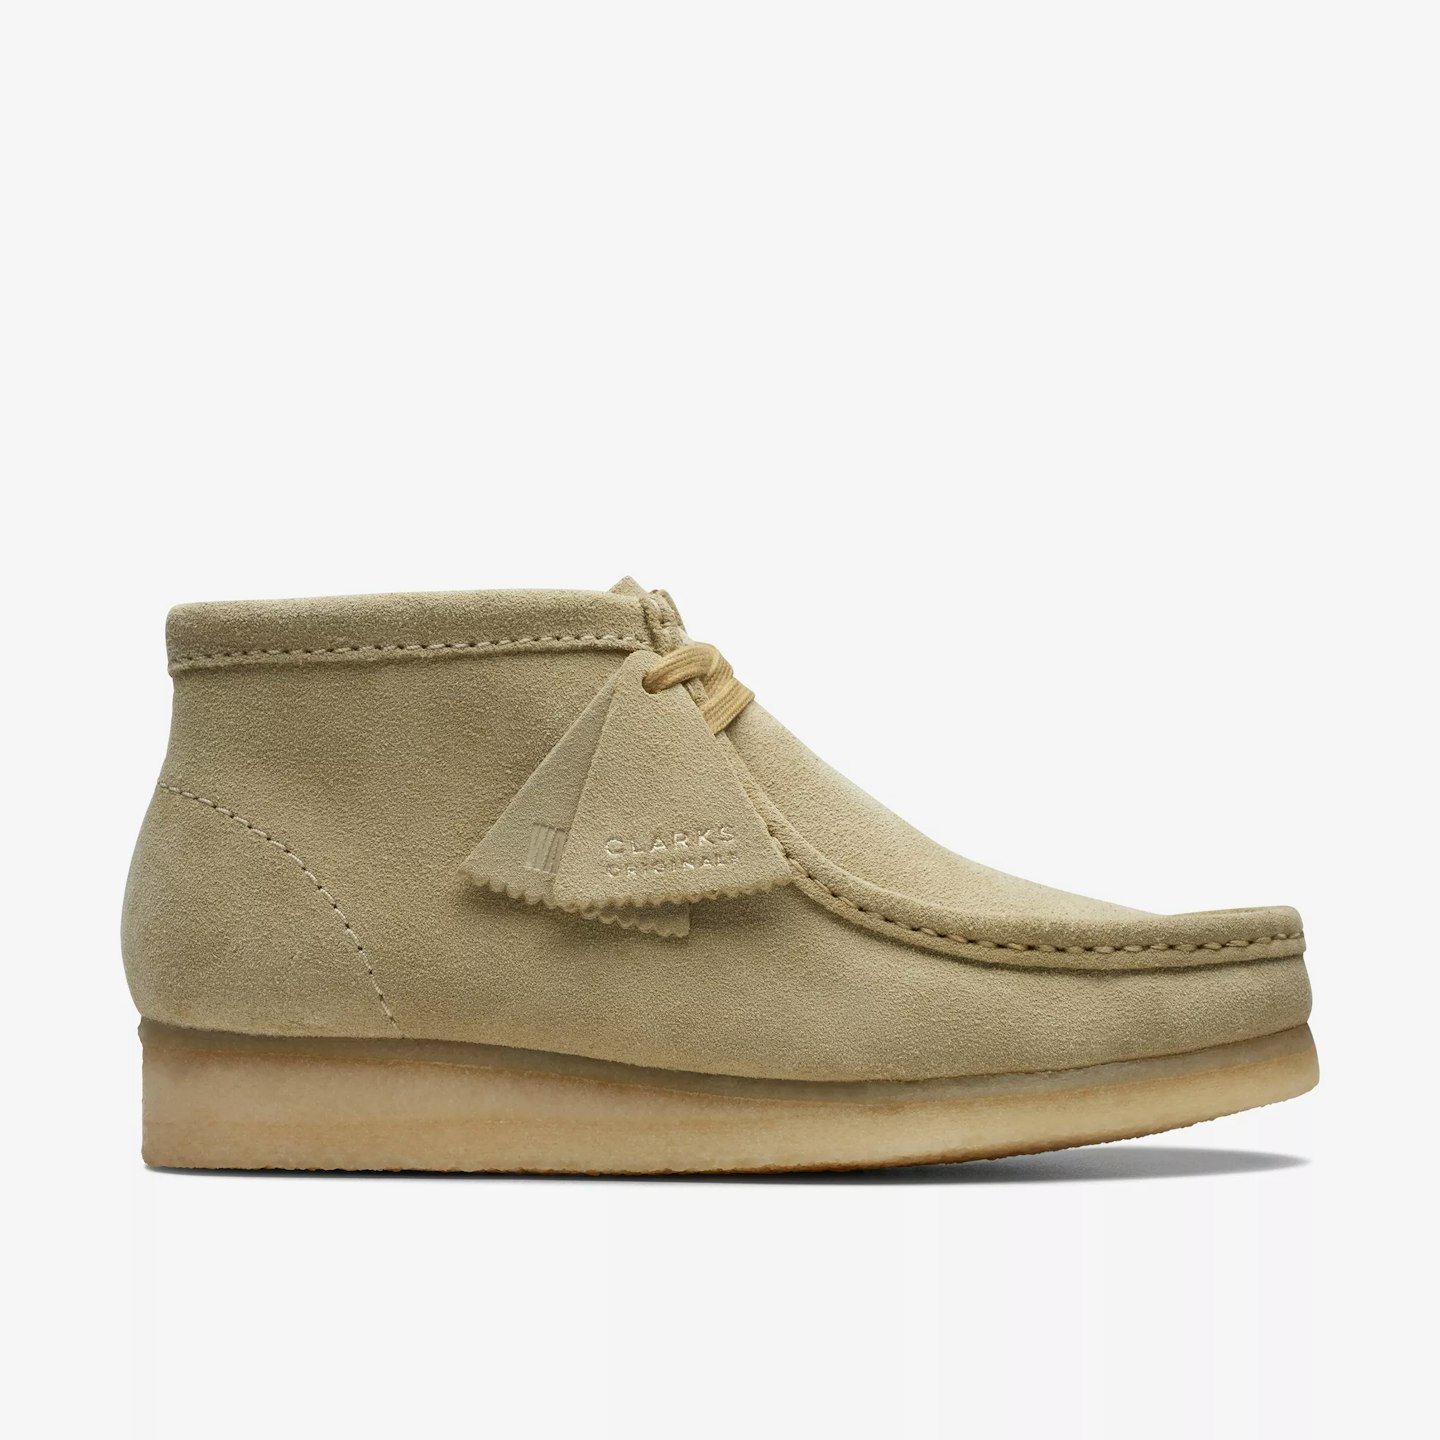 clarks wallabee boots 